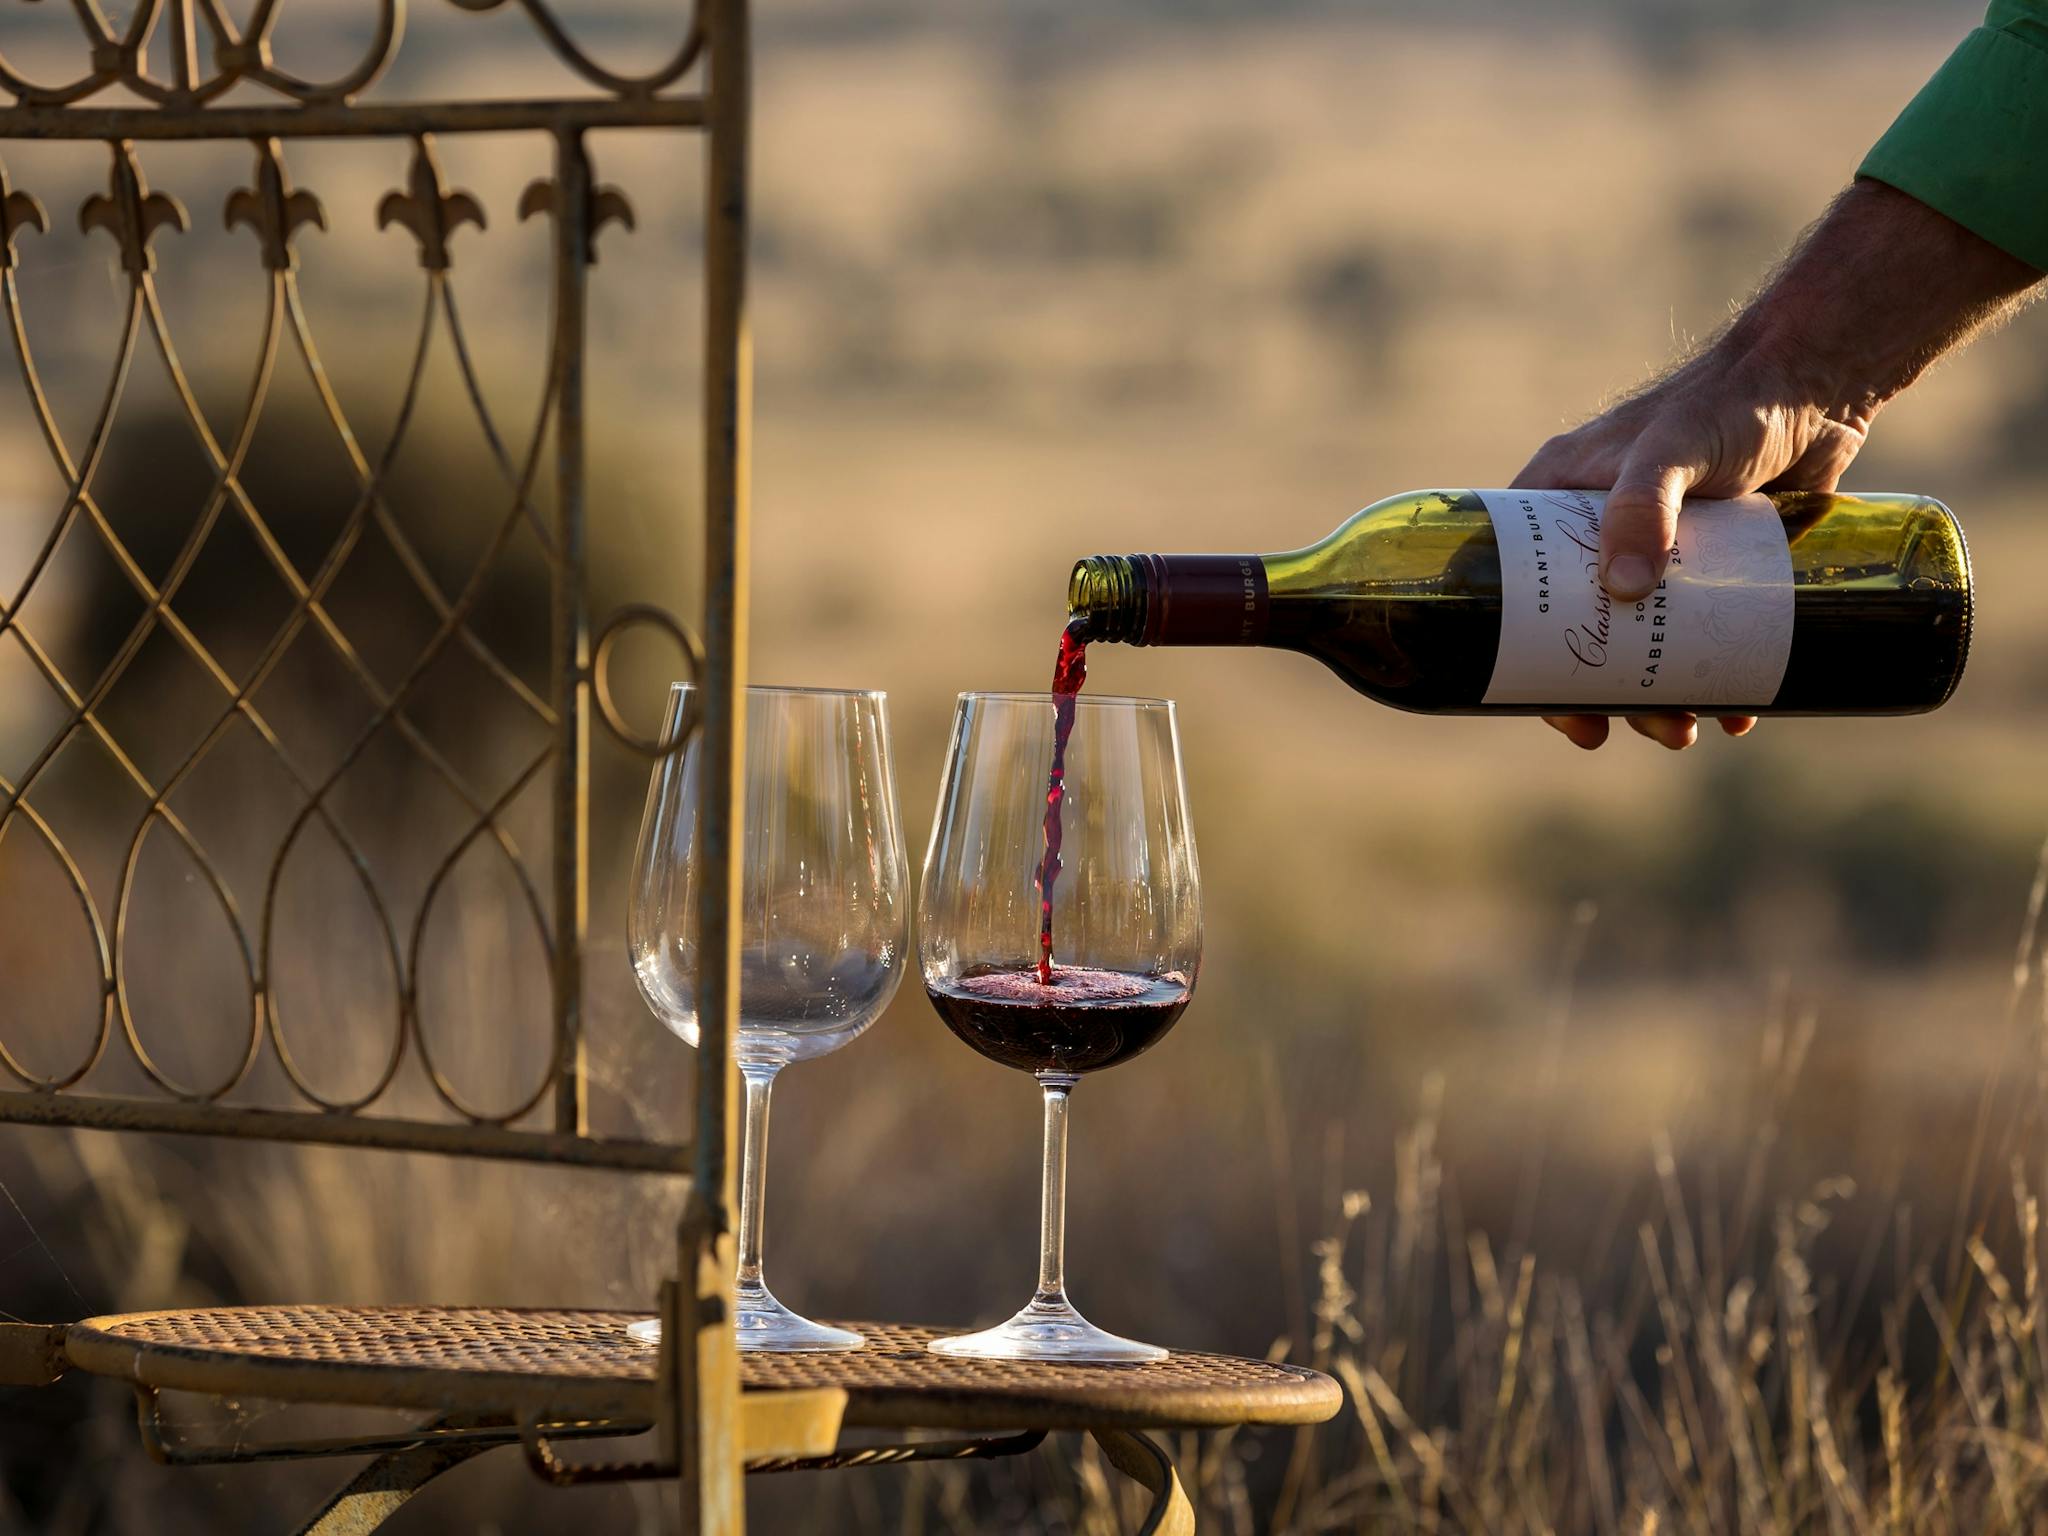 Outdoors, rural view; wine glasses perched on metal chair; hand pouring red wine